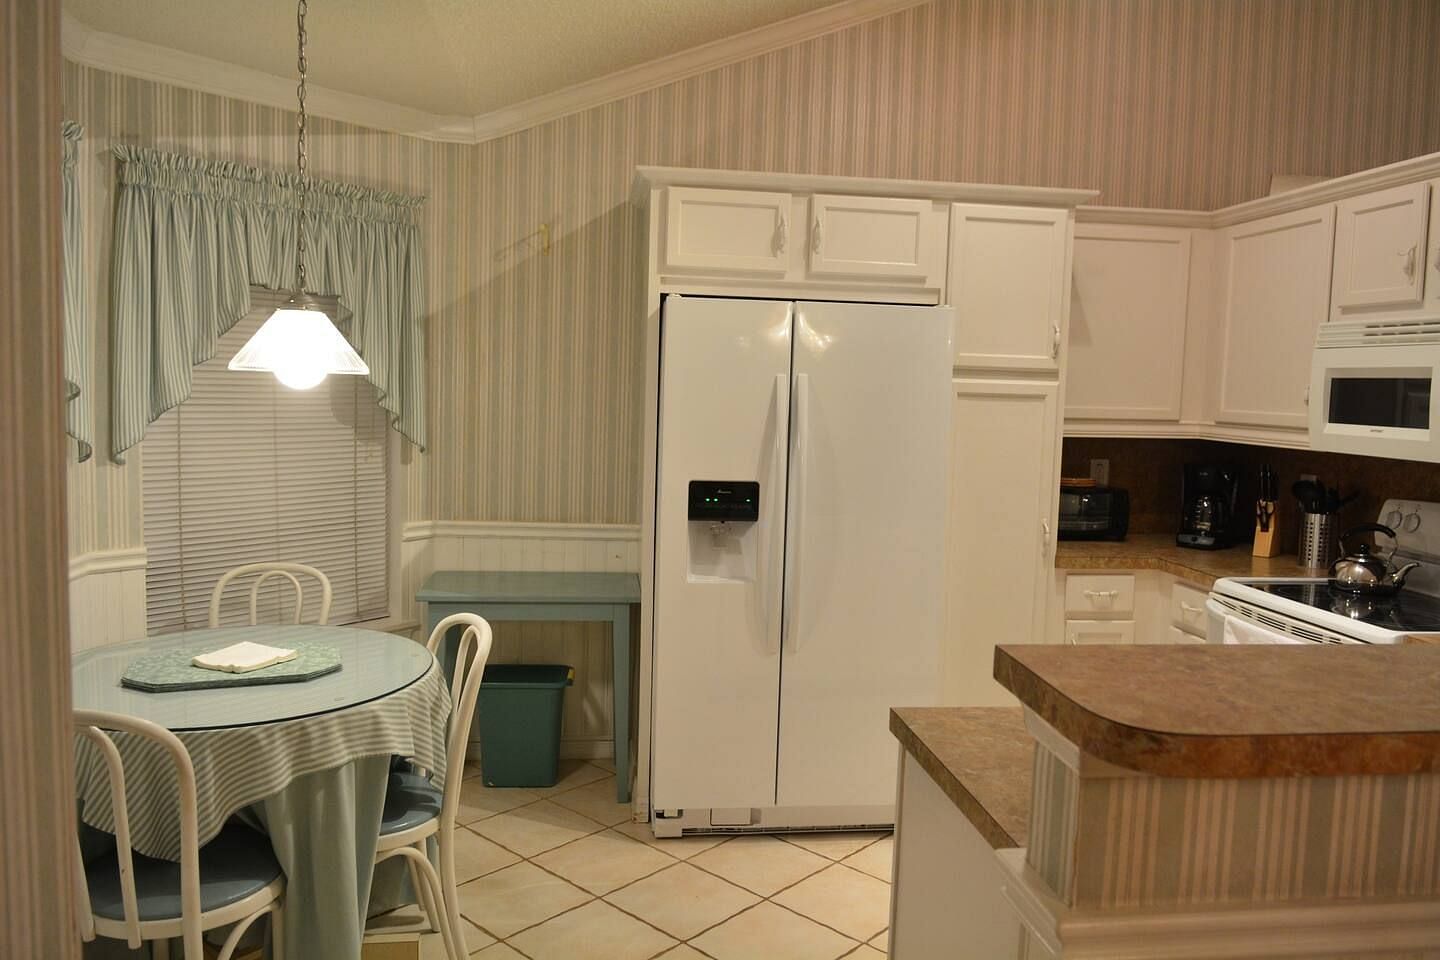 JWguest House at Orlando, Florida | Private Home with Pool, 3 Bd 2 Bath, Close to Disney | Jwbnb no brobnb 10